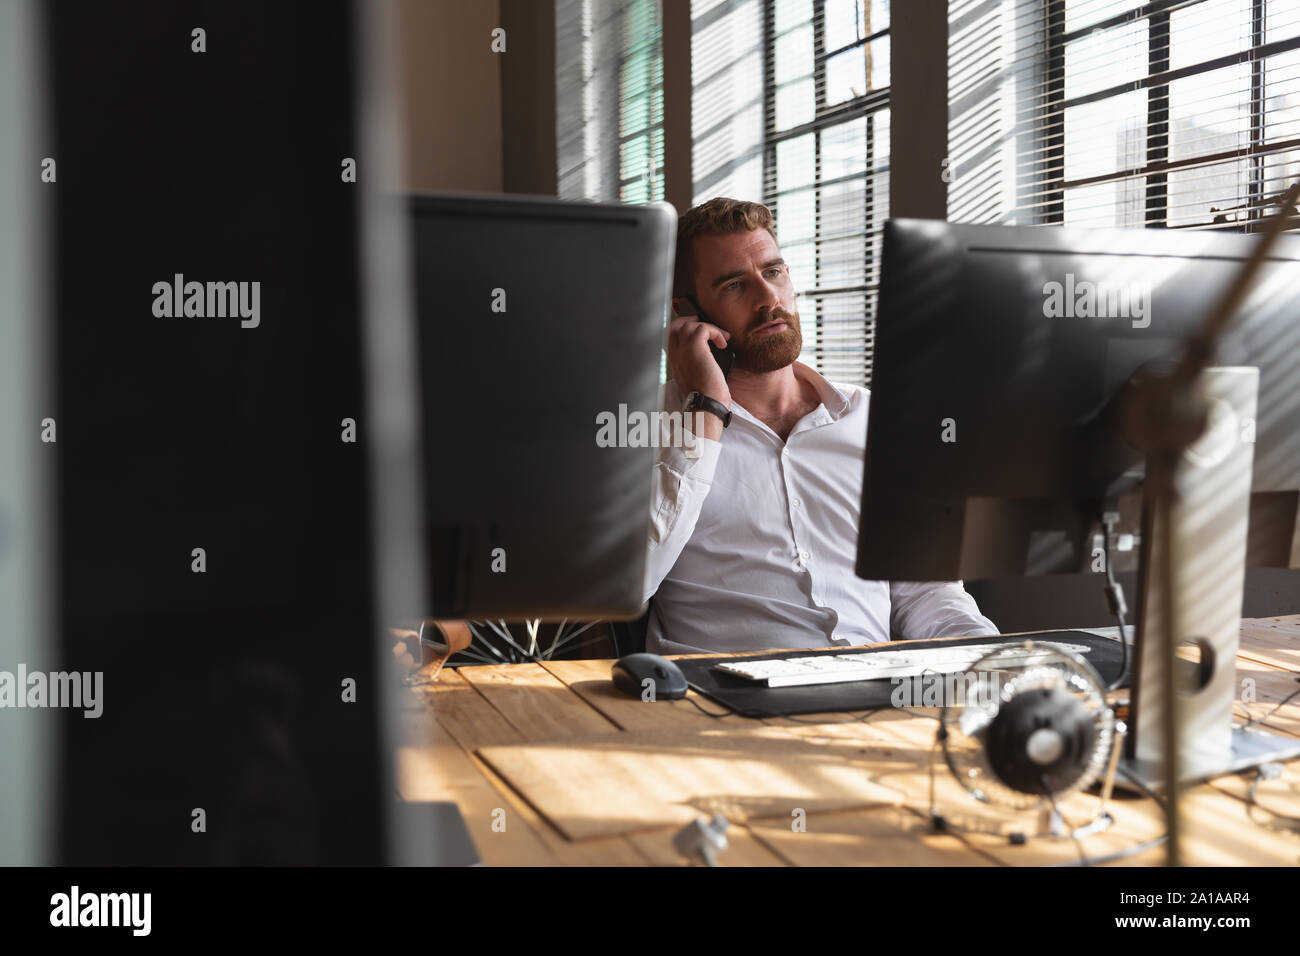 Young creative professional man on the phone in a sunlit office Stock Photo